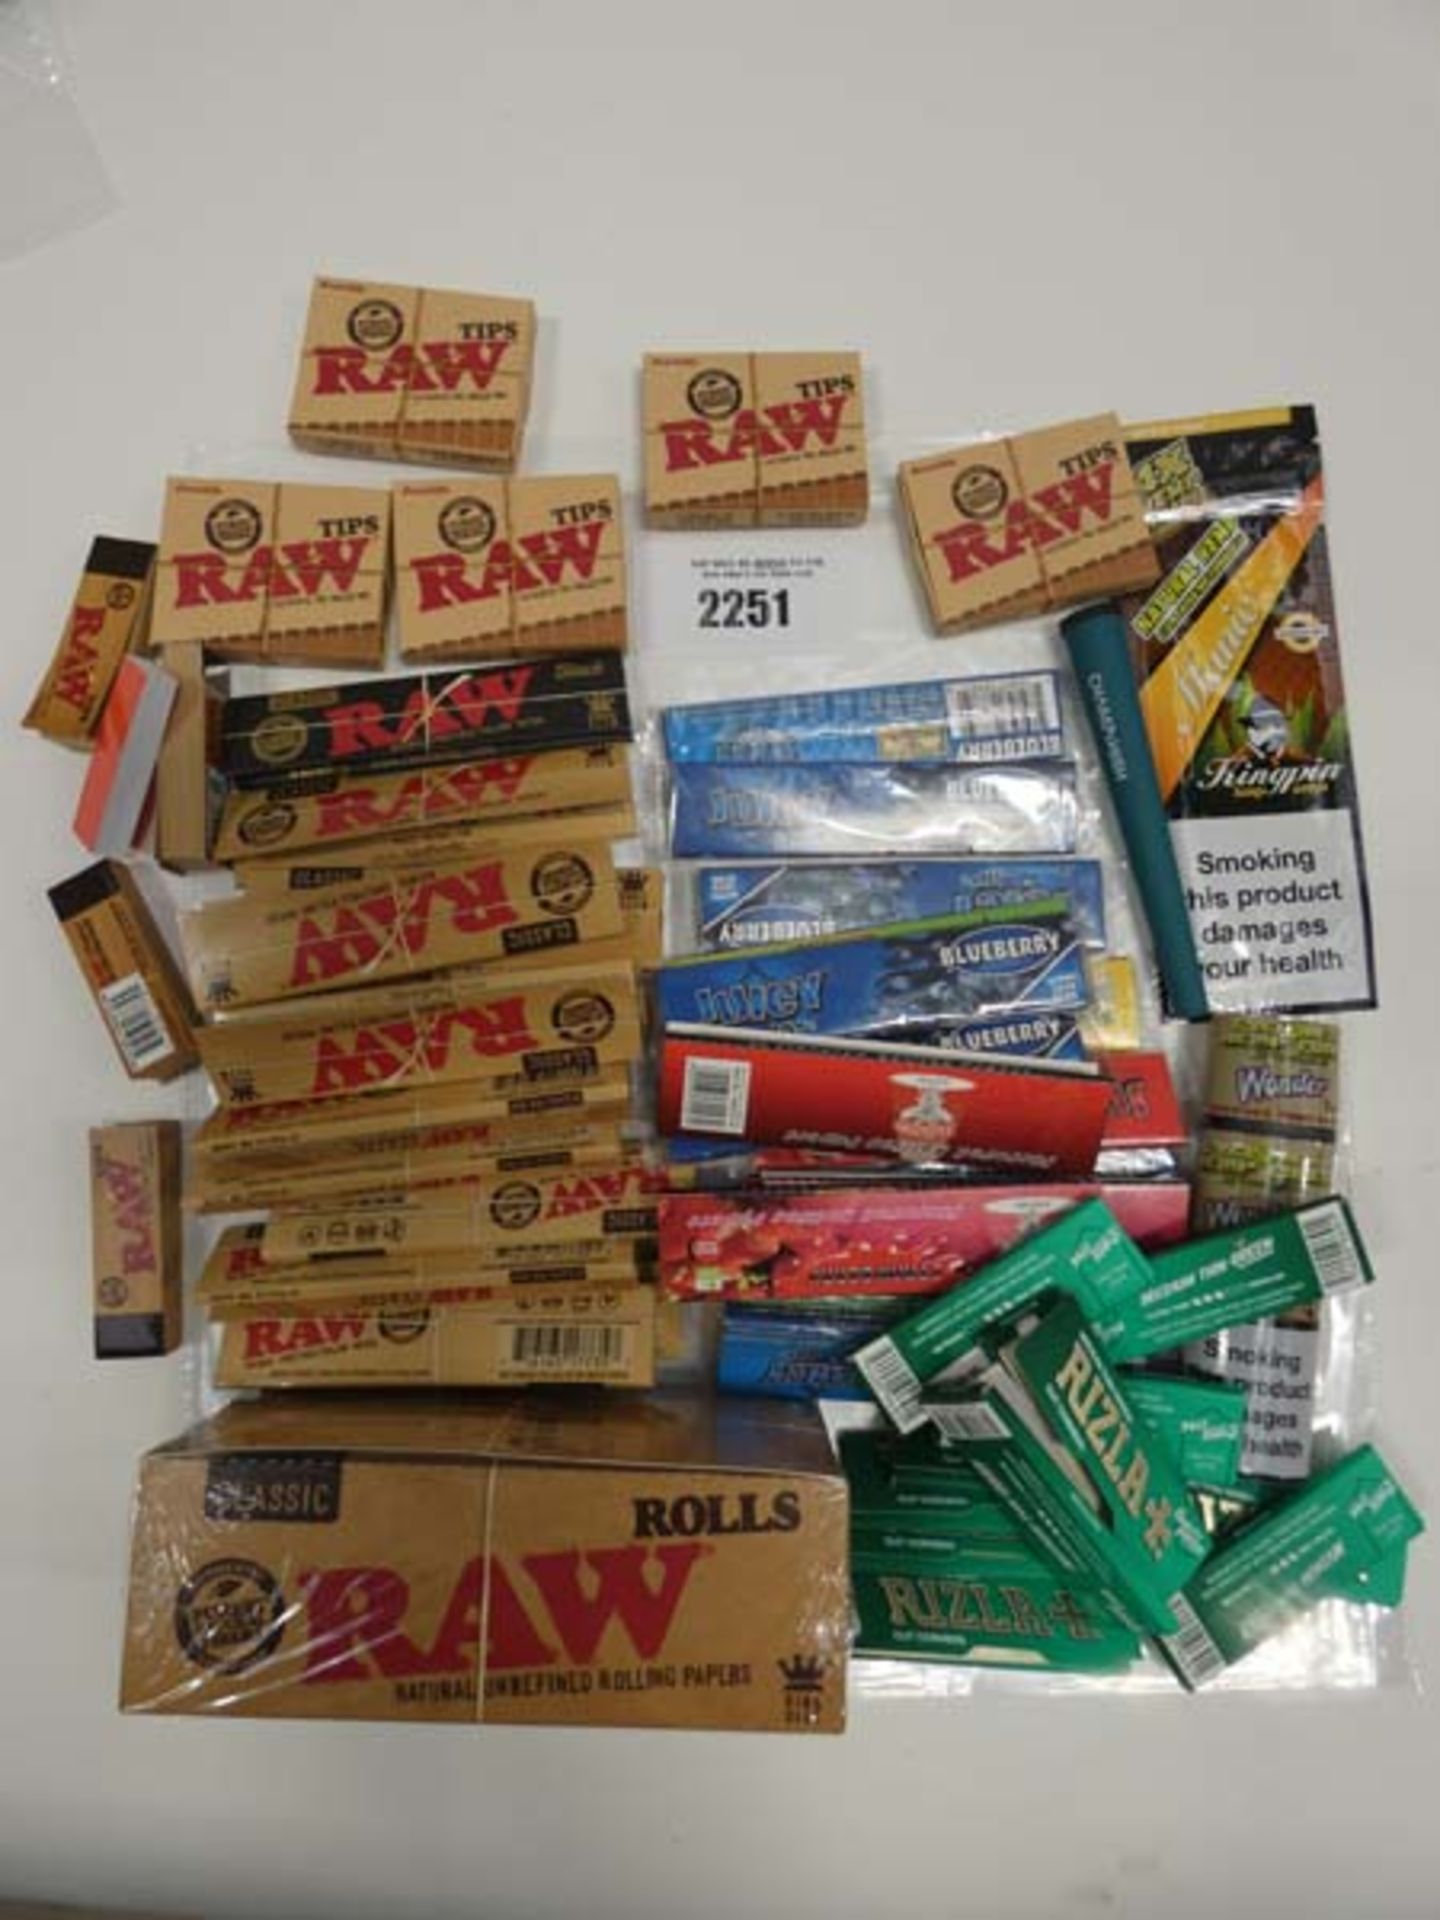 Quantity of kingsize and small rolling papers and card tips